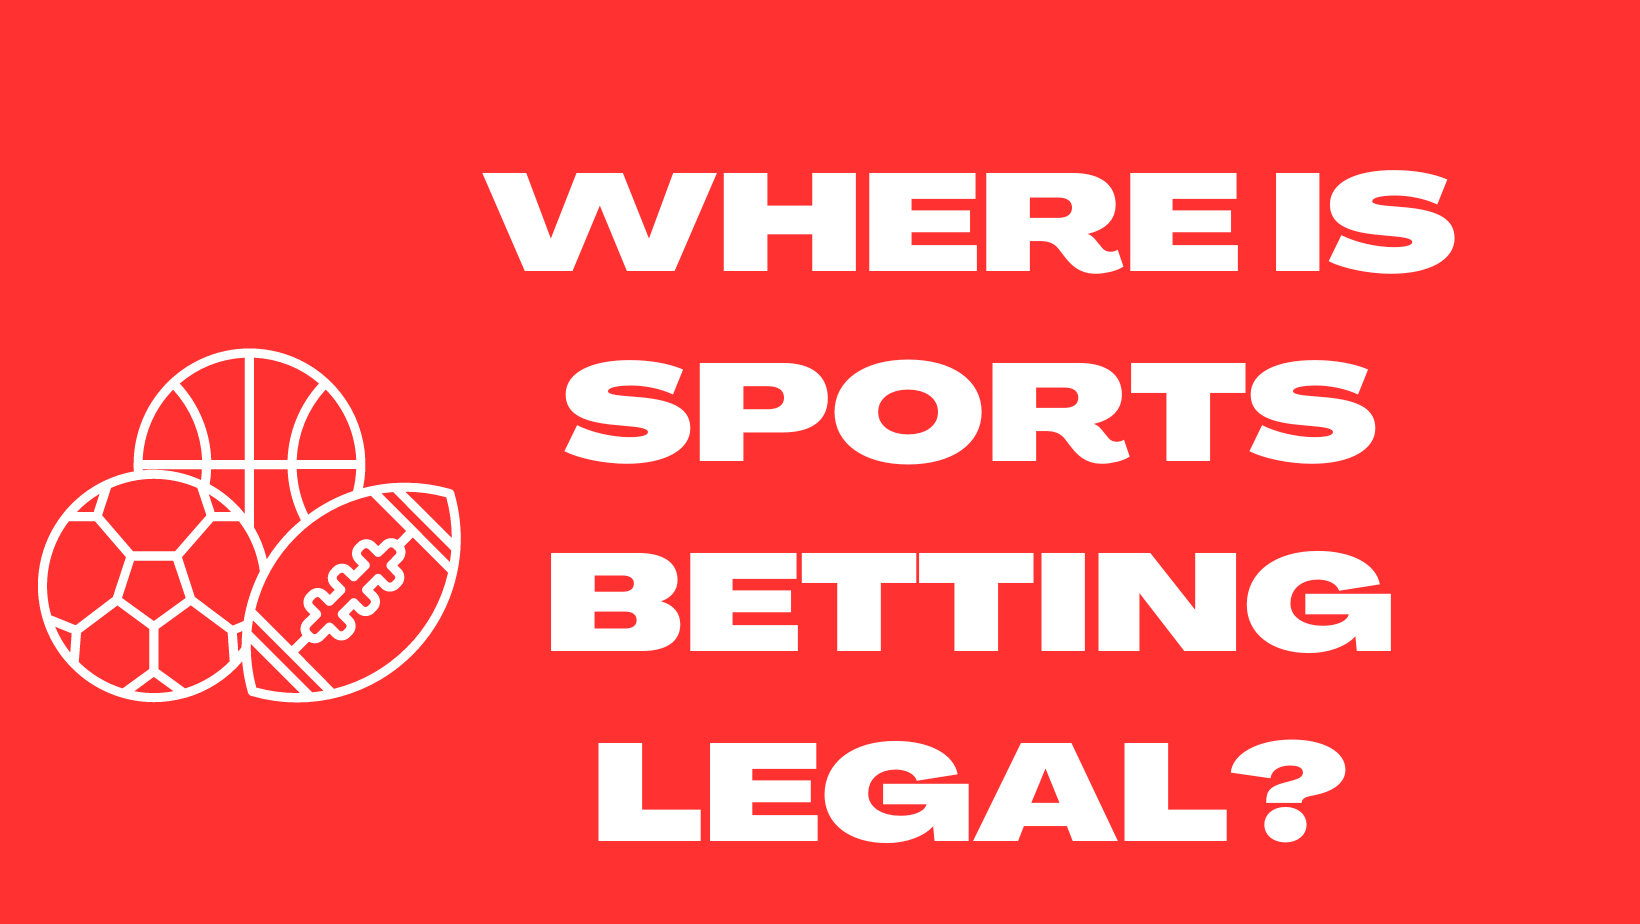 Where is sports betting legal?